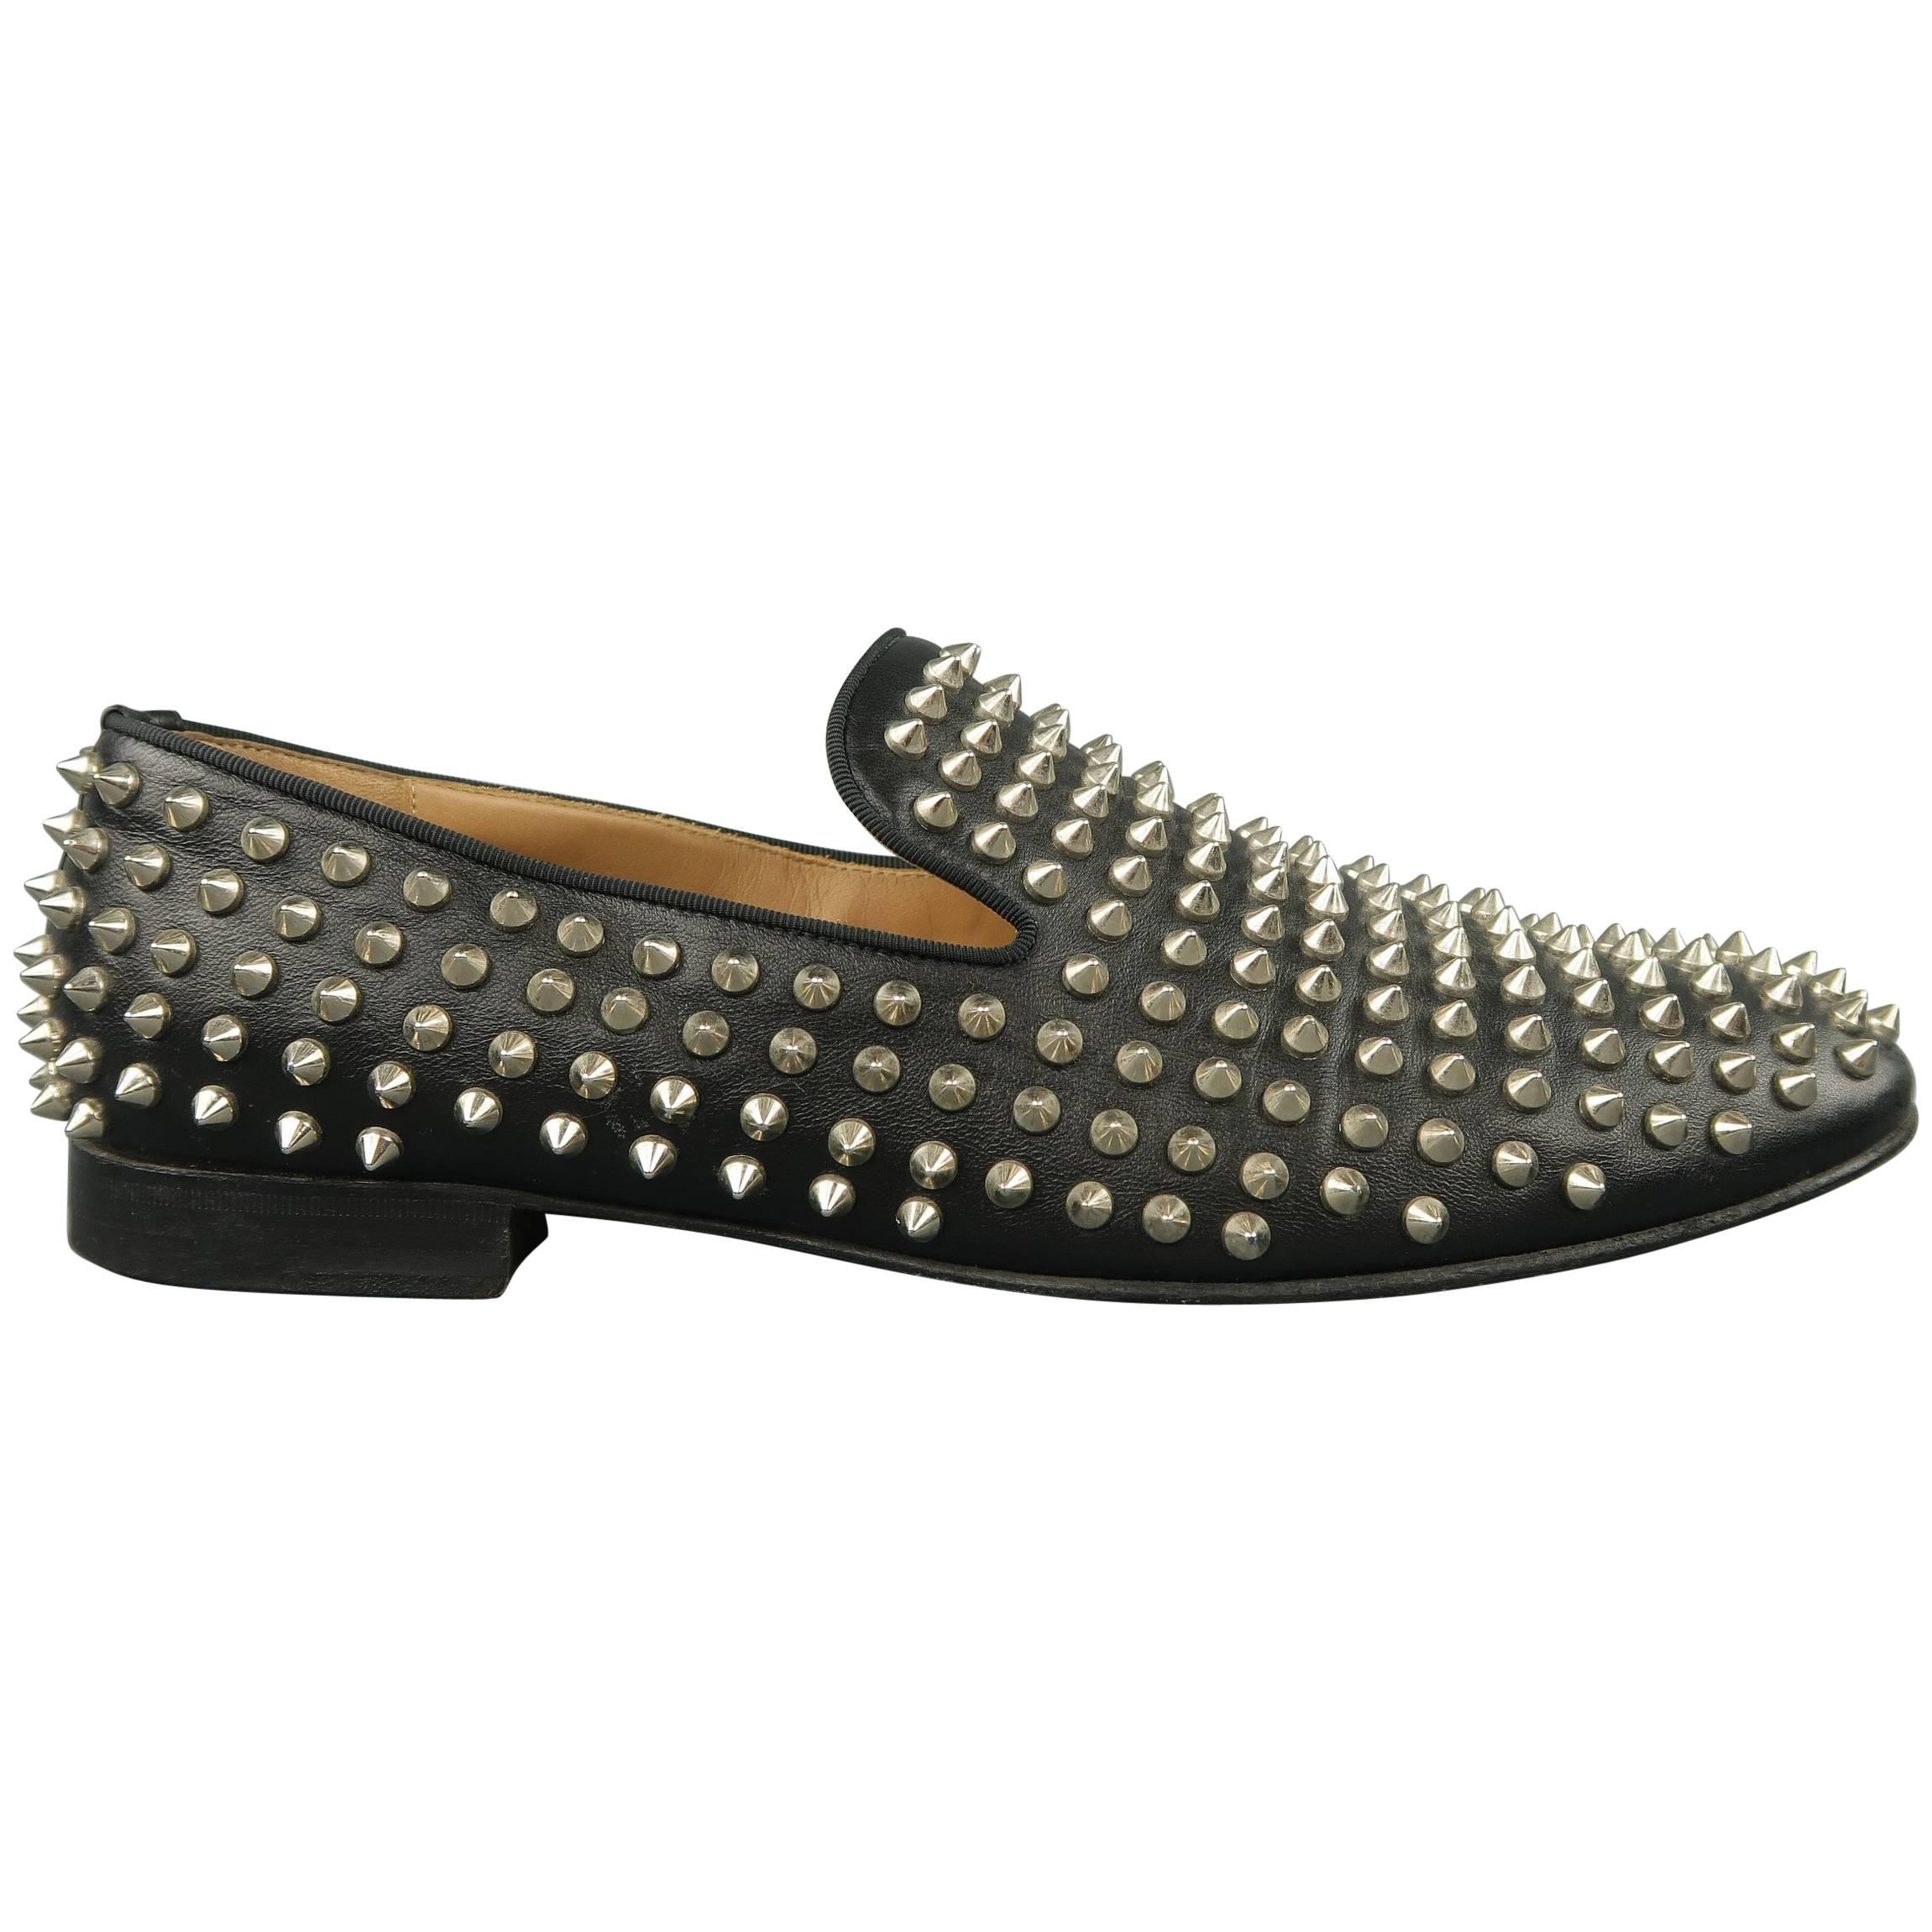 Men's CHRISTIAN LOUBOUTIN Size 9.5 Black Rollerboy Spikes Leather Loafers